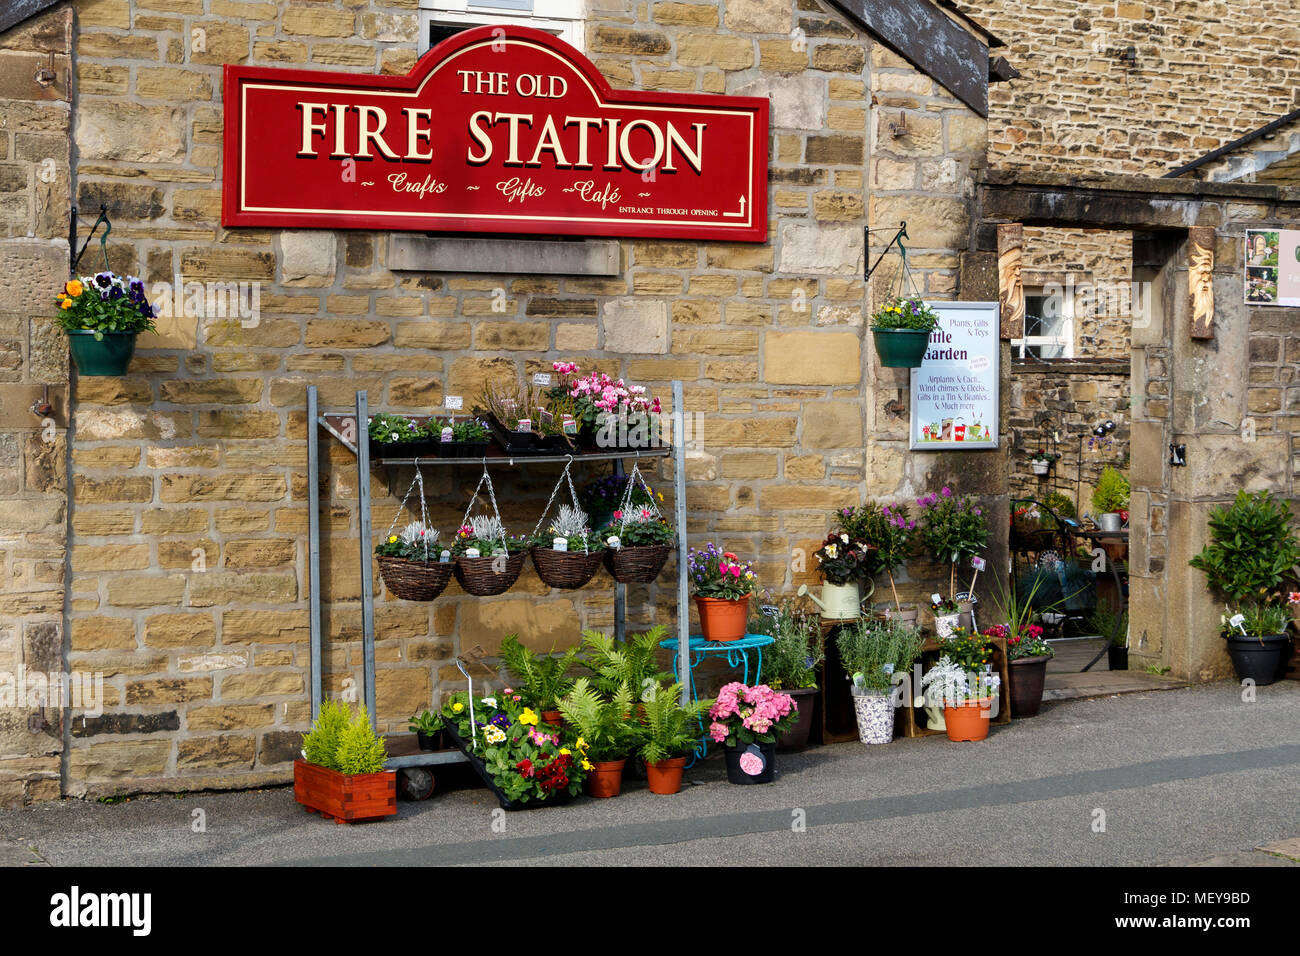 The Old Fire Station in Skipton, North Yorkshire, UK. Now a multi-retailer facility including garden nursey and Cafe. Stock Photo